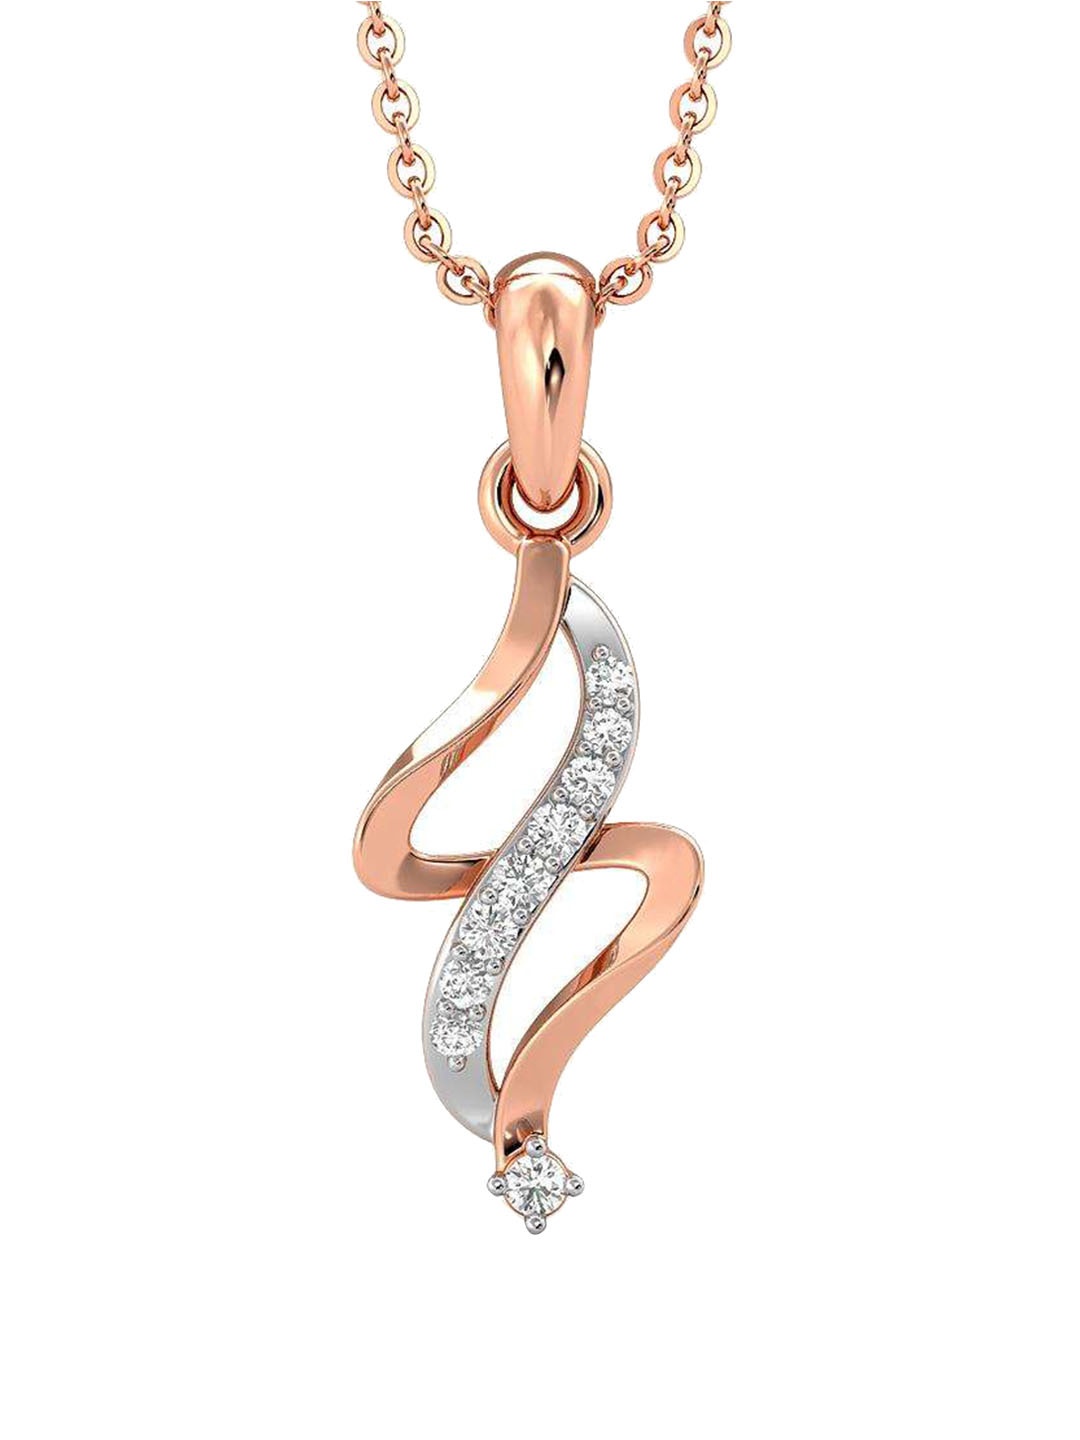 

CANDERE A KALYAN JEWELLERS COMPANY 18K Rose Gold Cubic Zirconia-Studded Pendant-0.91 gm, White